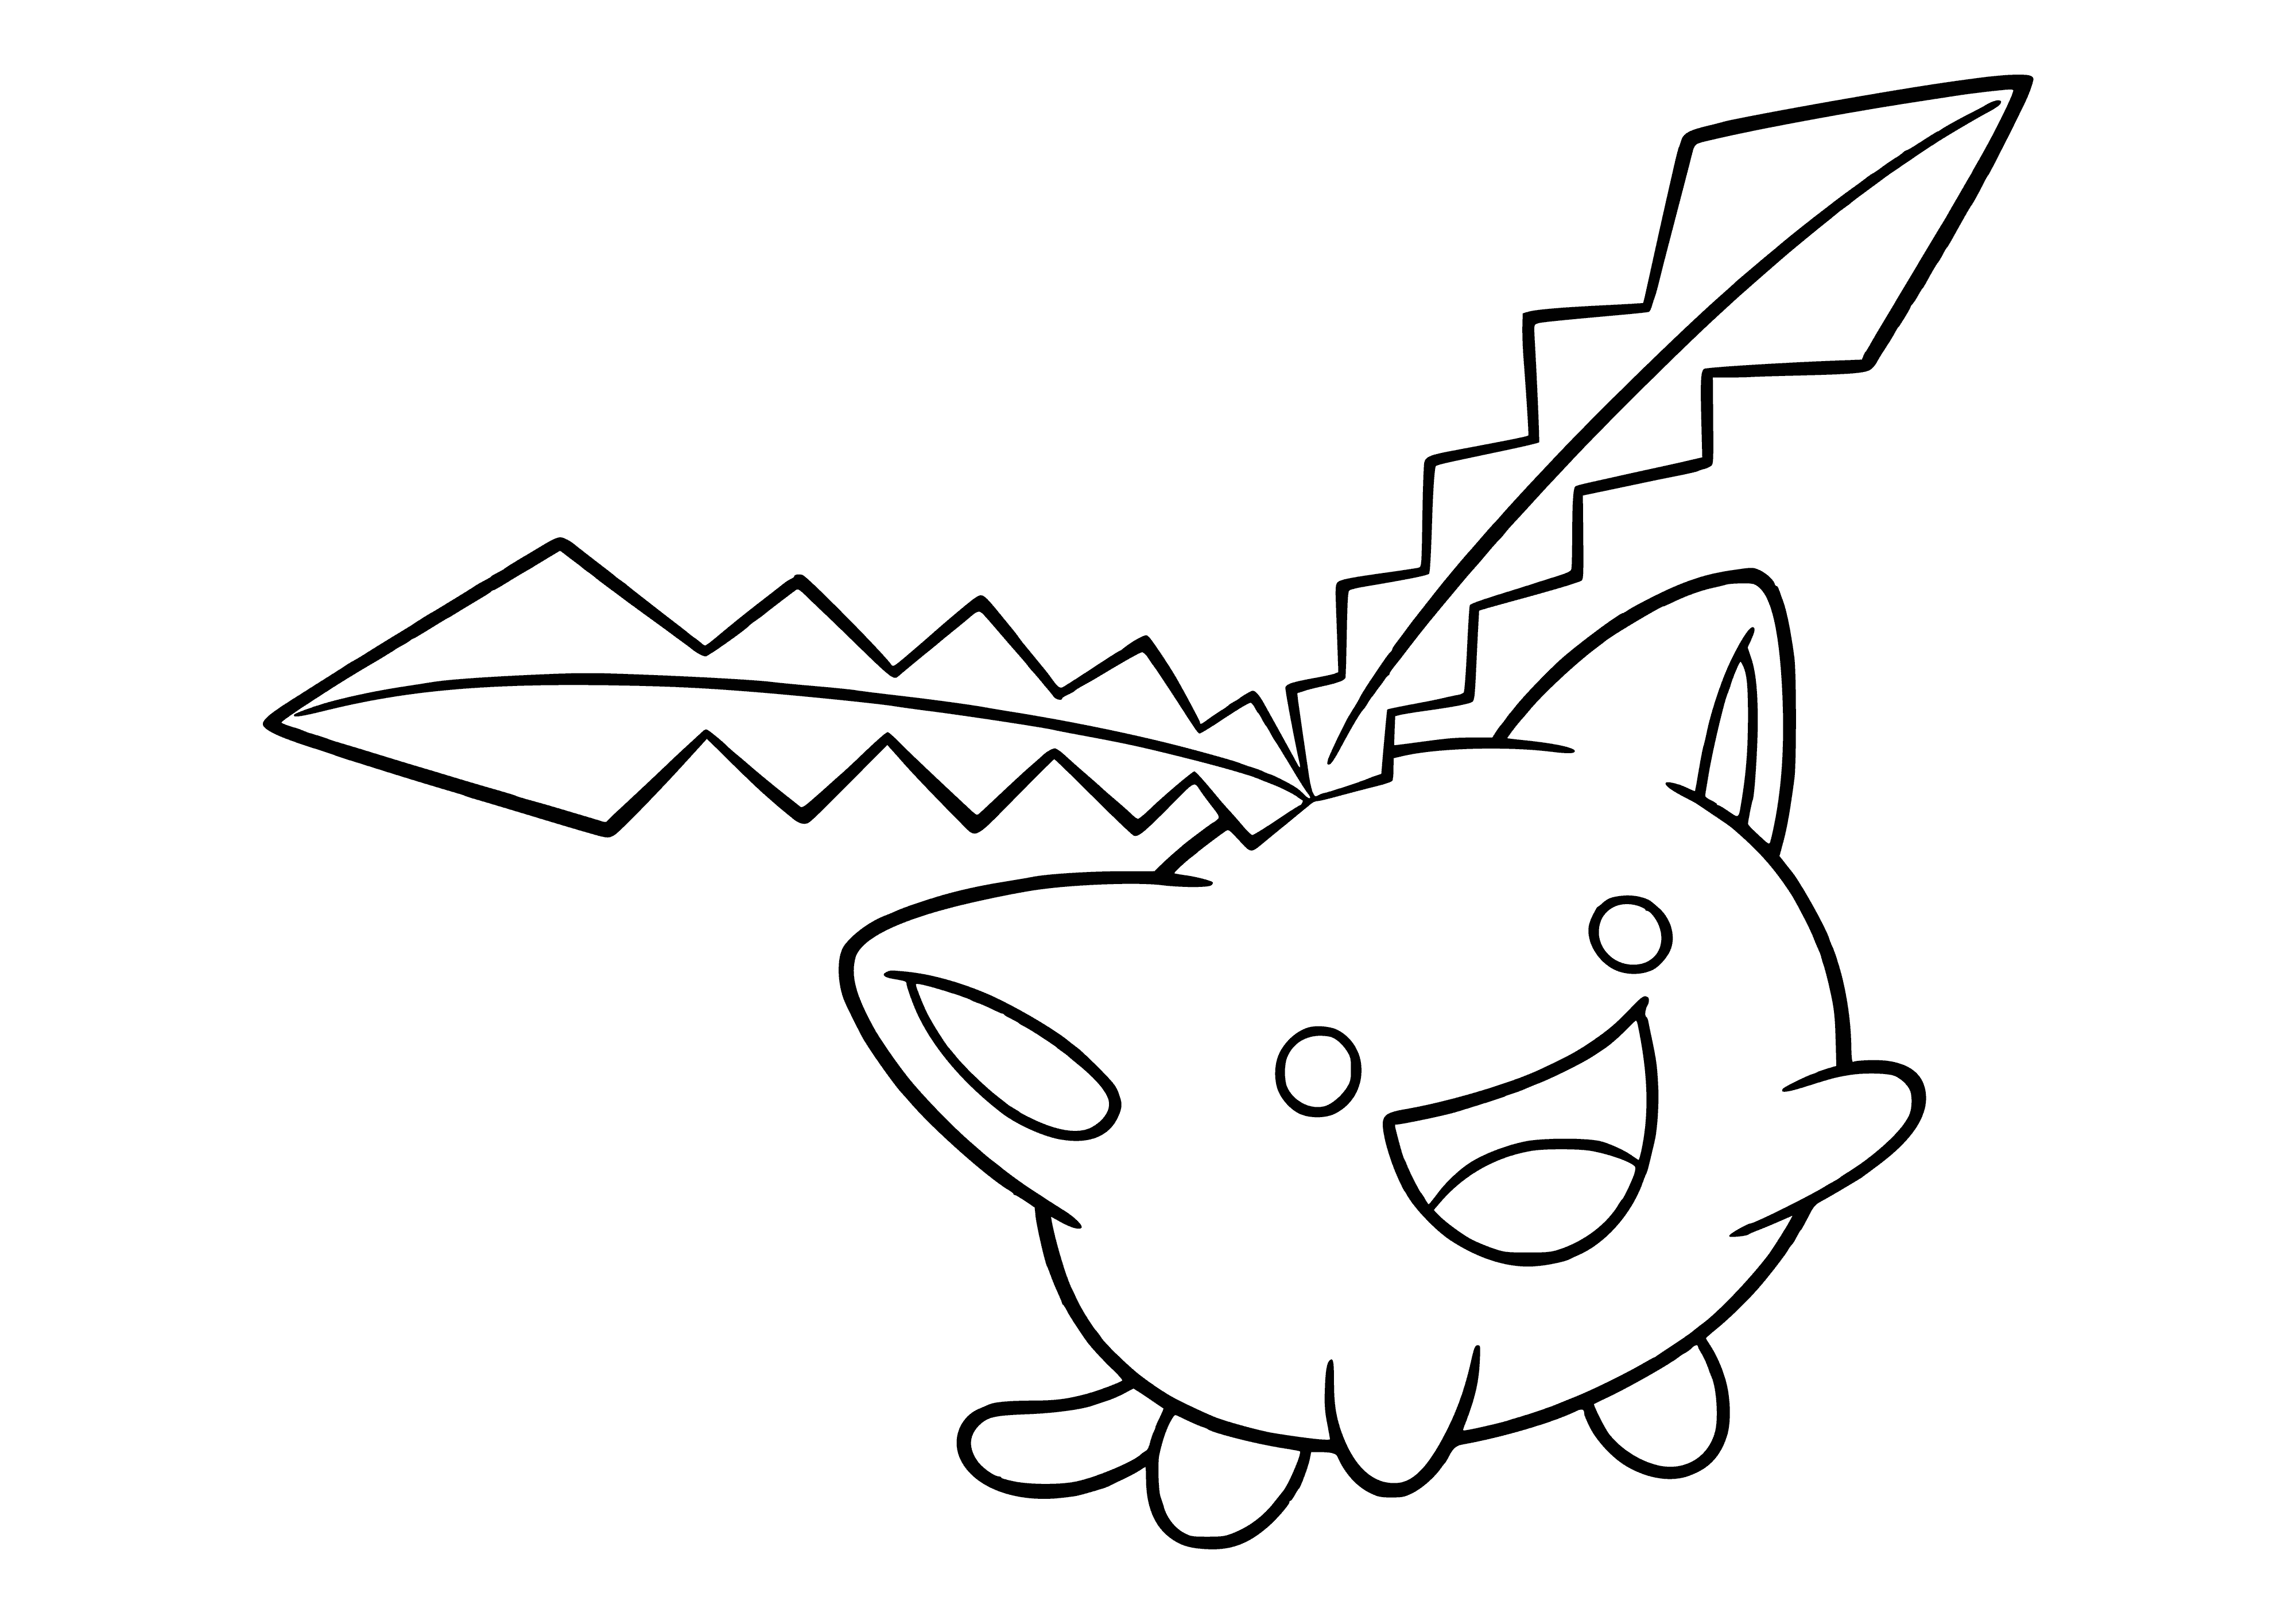 coloring page: This is a coloring page of Hoppip, a small, pink pokemon with four limbs & four leaves atop its head. It has a white cocoon, showing it's evolving.